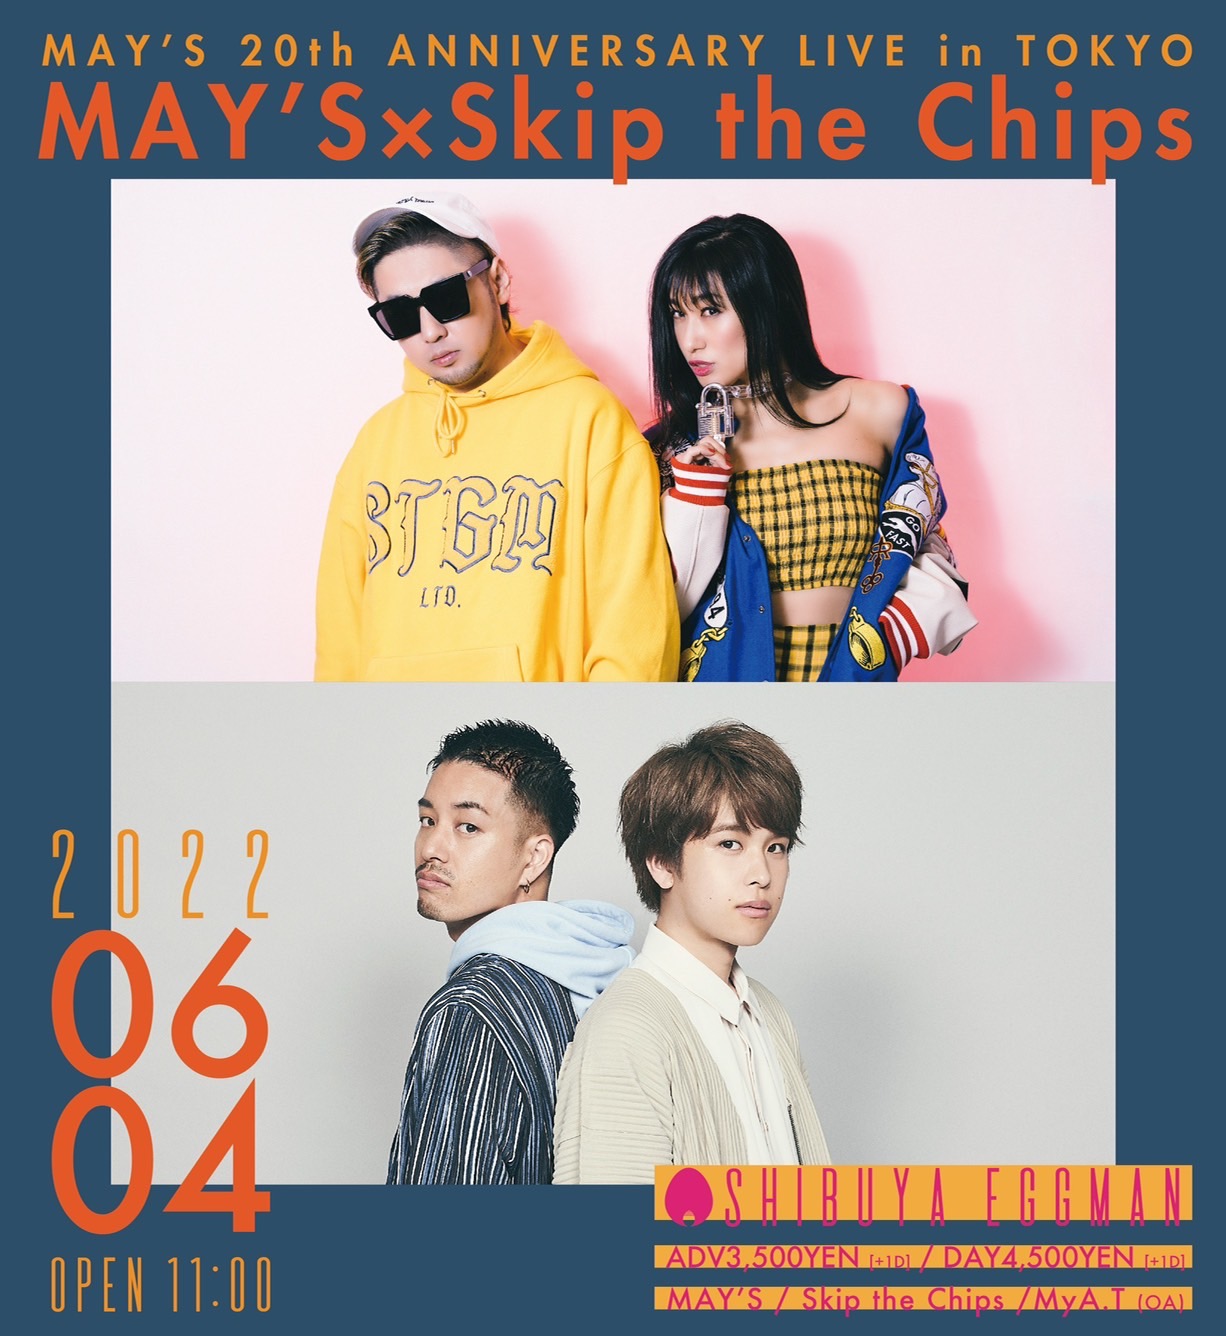 MAY’S 20TH ANNIVERSARY LIVE in TOKYO “MAY’S × Skip the Chips”